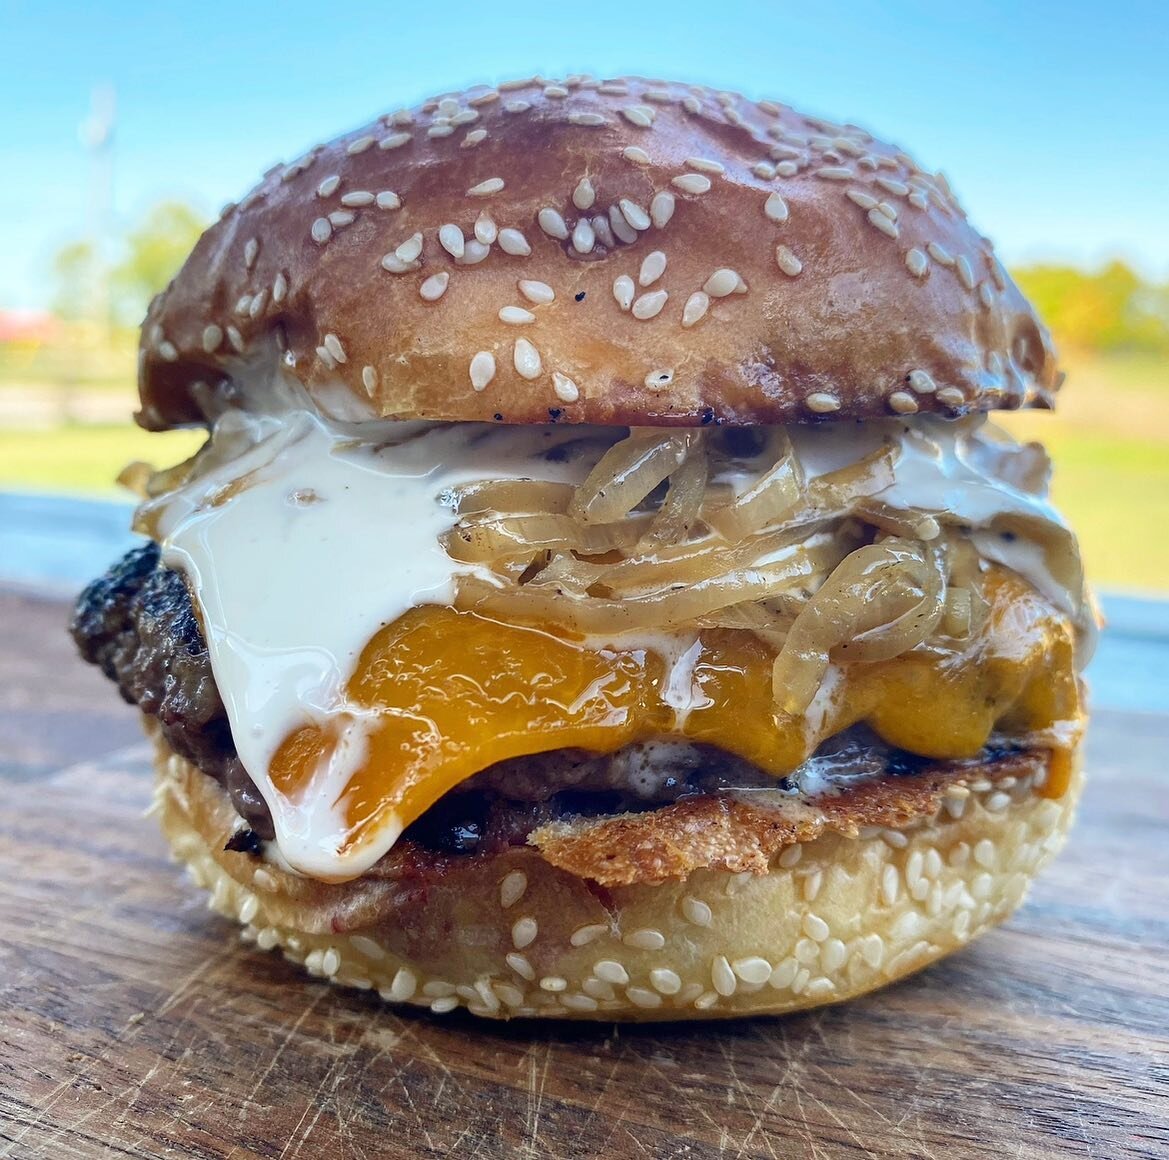 Weekend number 2 and here&rsquo;s what we&rsquo;ve got for you&hellip;.paired with the boldest brew from our best pals right down the rue @gillinghambrewing 
.
.
The Gillingham &ldquo;Buff&rdquo; Burger 🍔 🍻 
.
.
#burger #beer #pec #princeedwardcoun